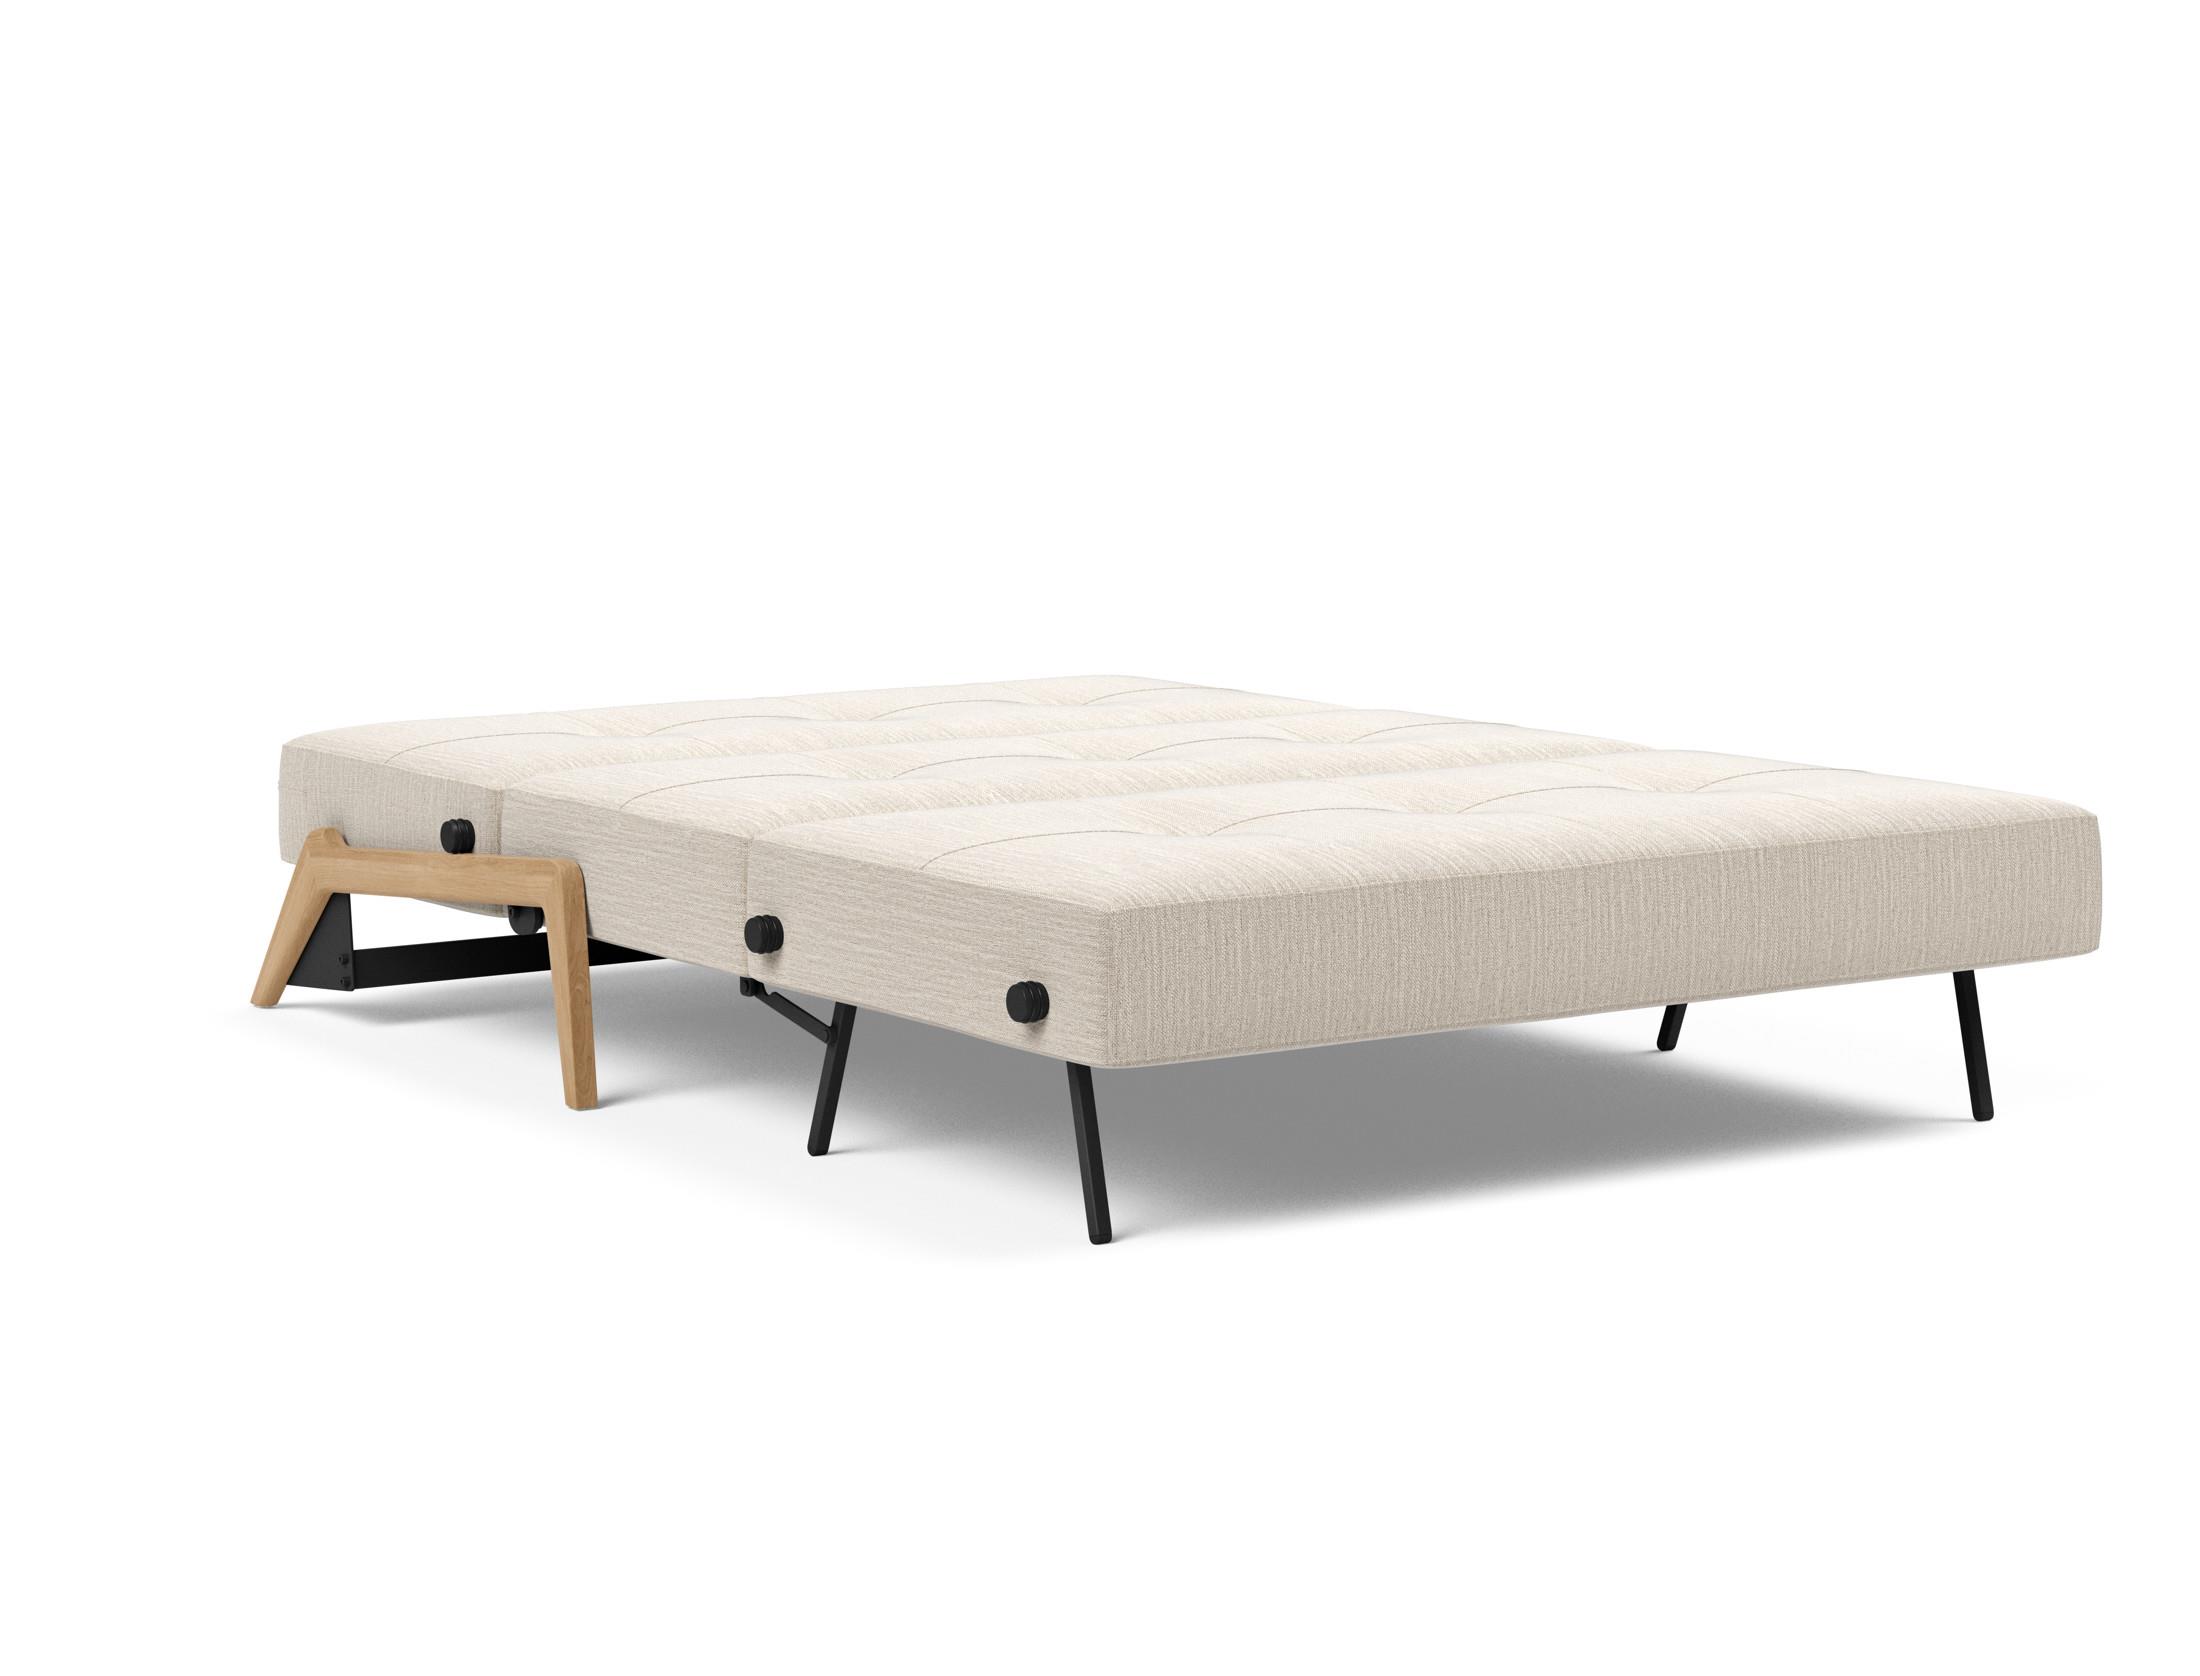 Cubed 140. Диван Cubed 140 Innovation. Innovation Cubed 140 Wood. Диван - Cubed 160 Wood Sofa Bed. Innovation Cubed 140 528 Wood.